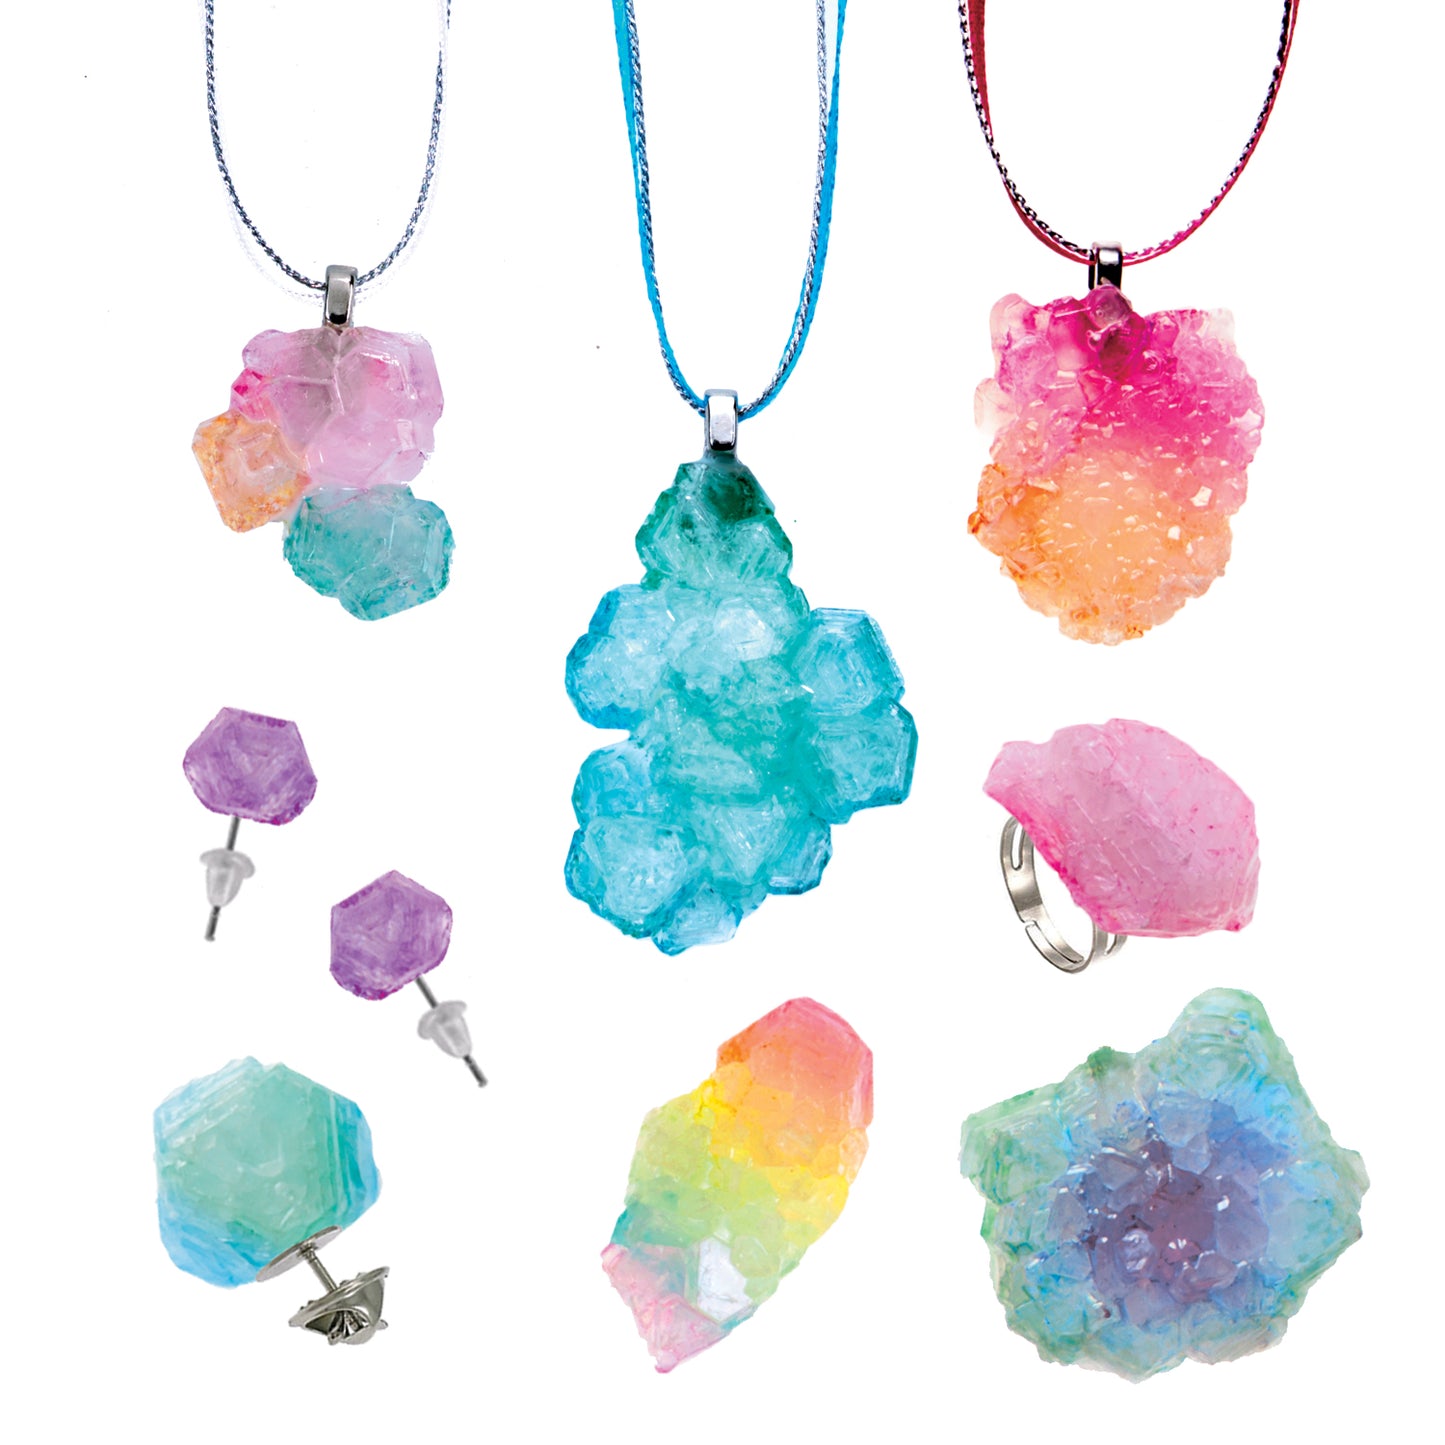 examples of necklaces, rings and earrings using the crystals growing and painting kit from faber castell